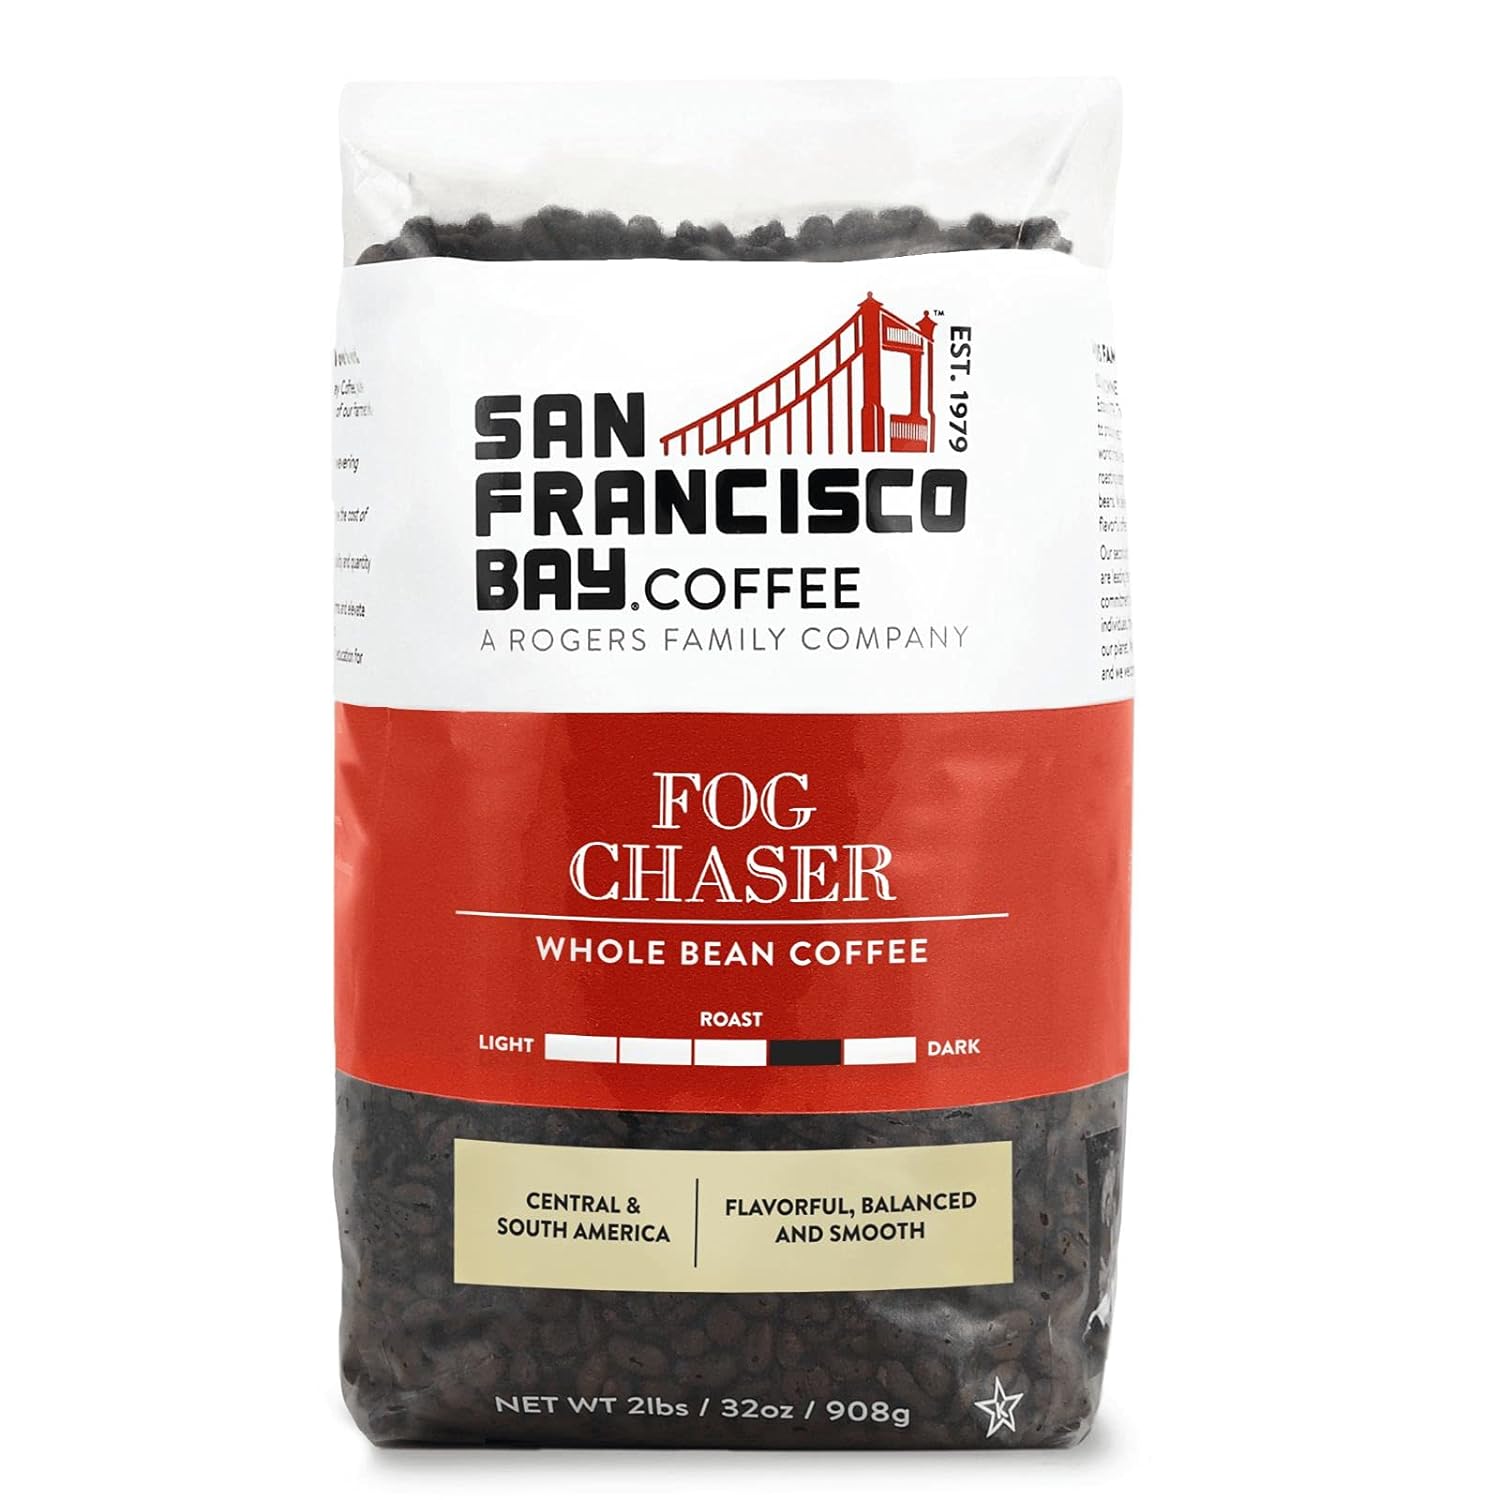 2-lbs San Francisco Bay Whole Bean Coffee (Fog Chaser or French Roast) $13.50 & More w/ S&S + Free Shipping w/ Prime or on $35+